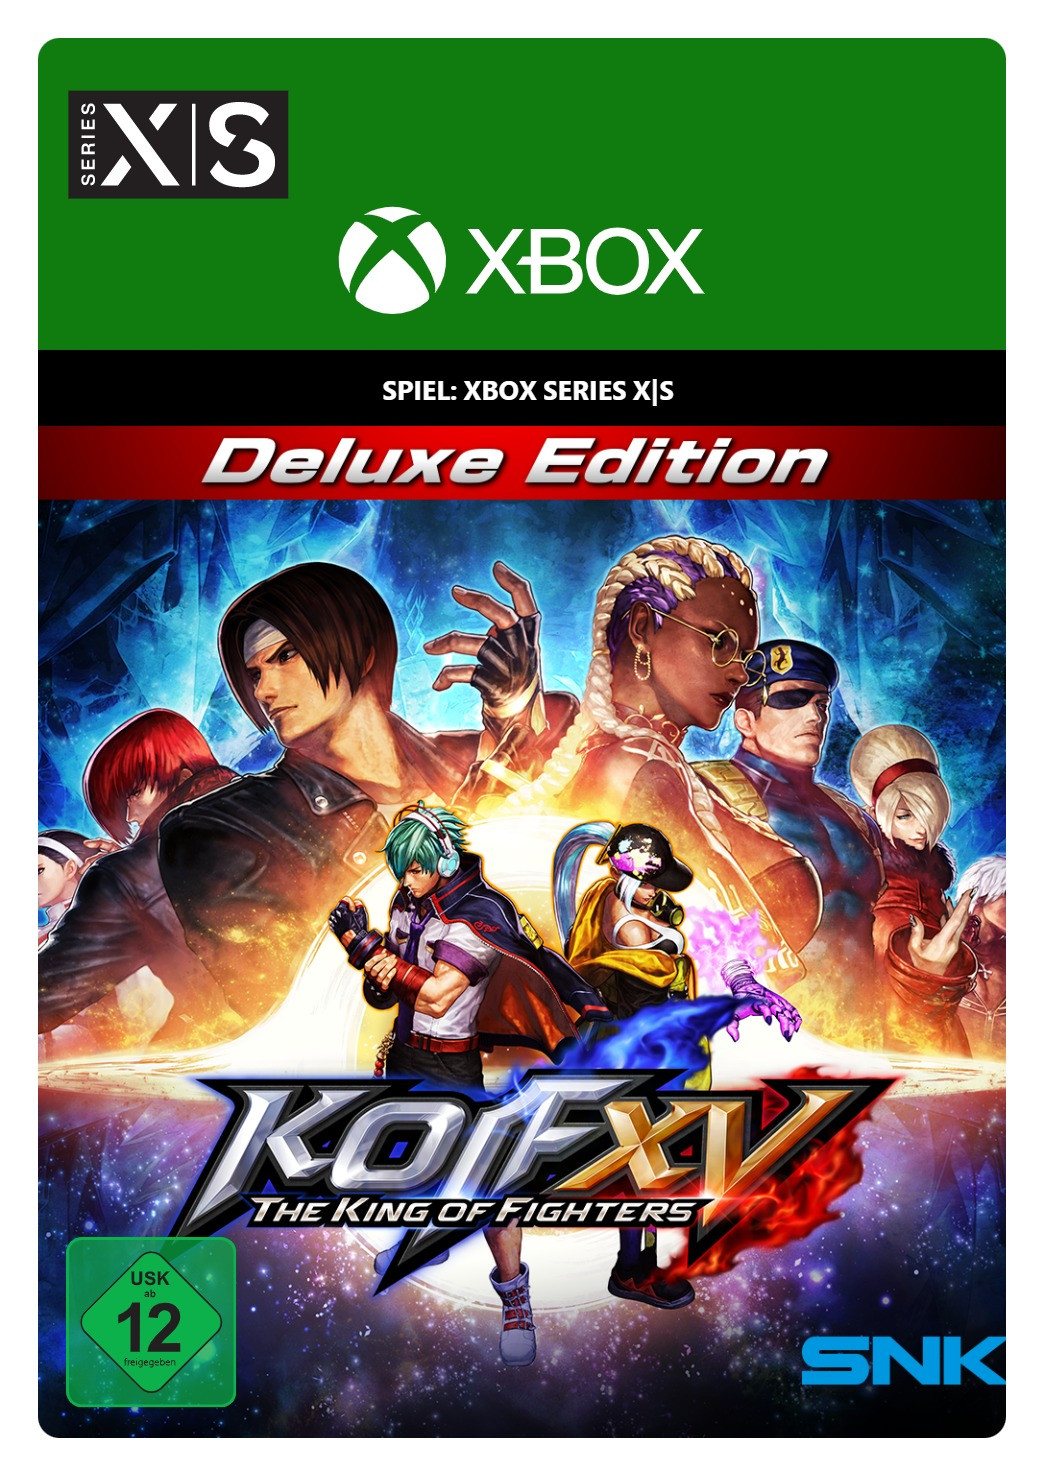 THE KING OF FIGHTERS XV Deluxe Edition von Deep Silver